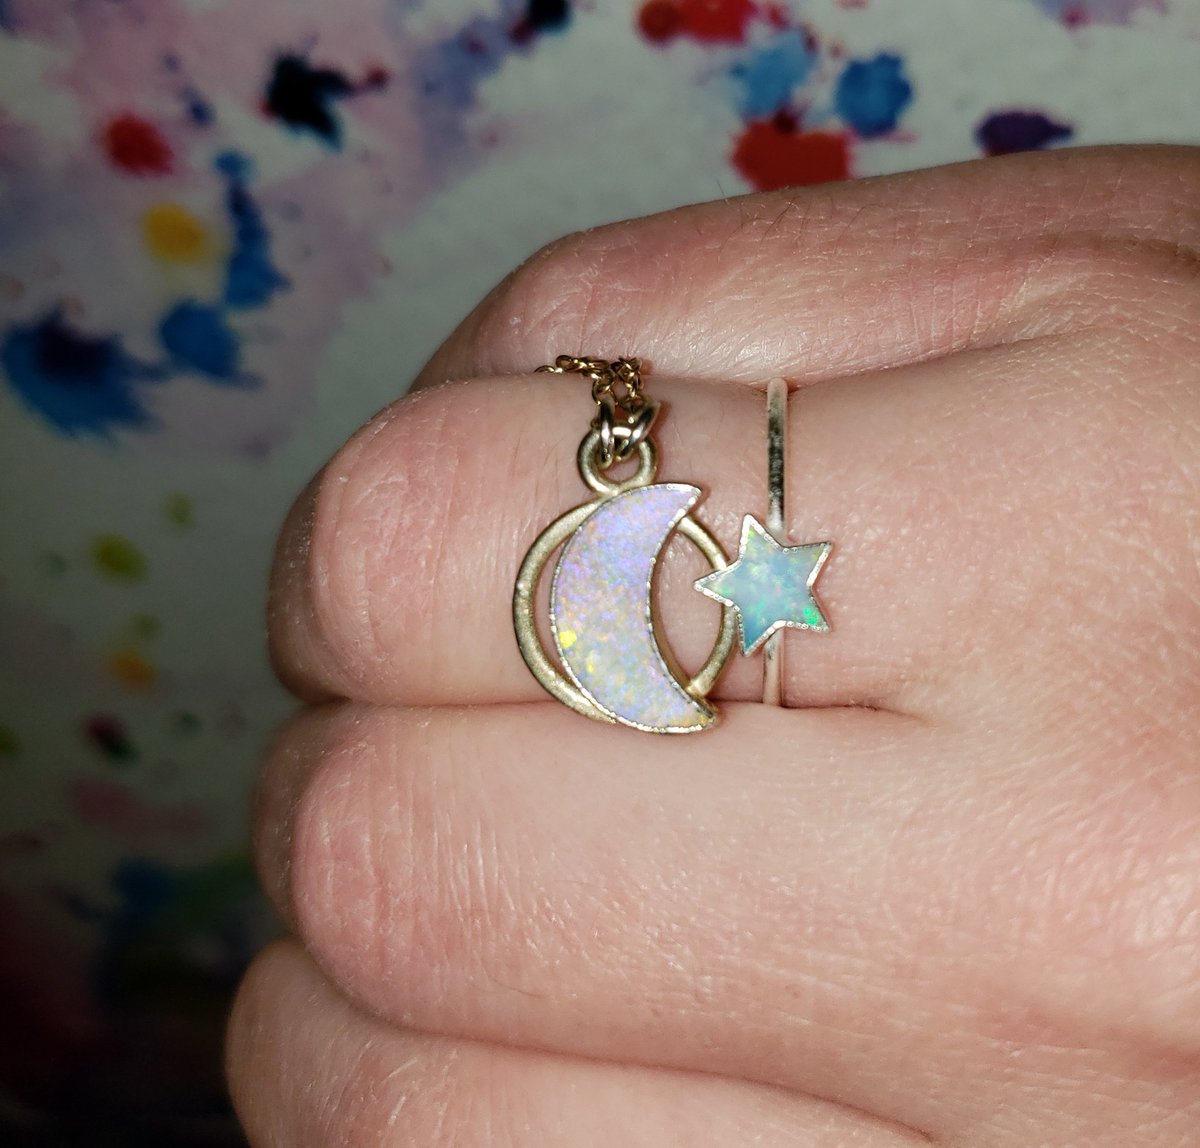 I got a star ring to go with my moon necklace Thank you for making such cute opal jewelery  @lunamosity_ Super excited for your next update!